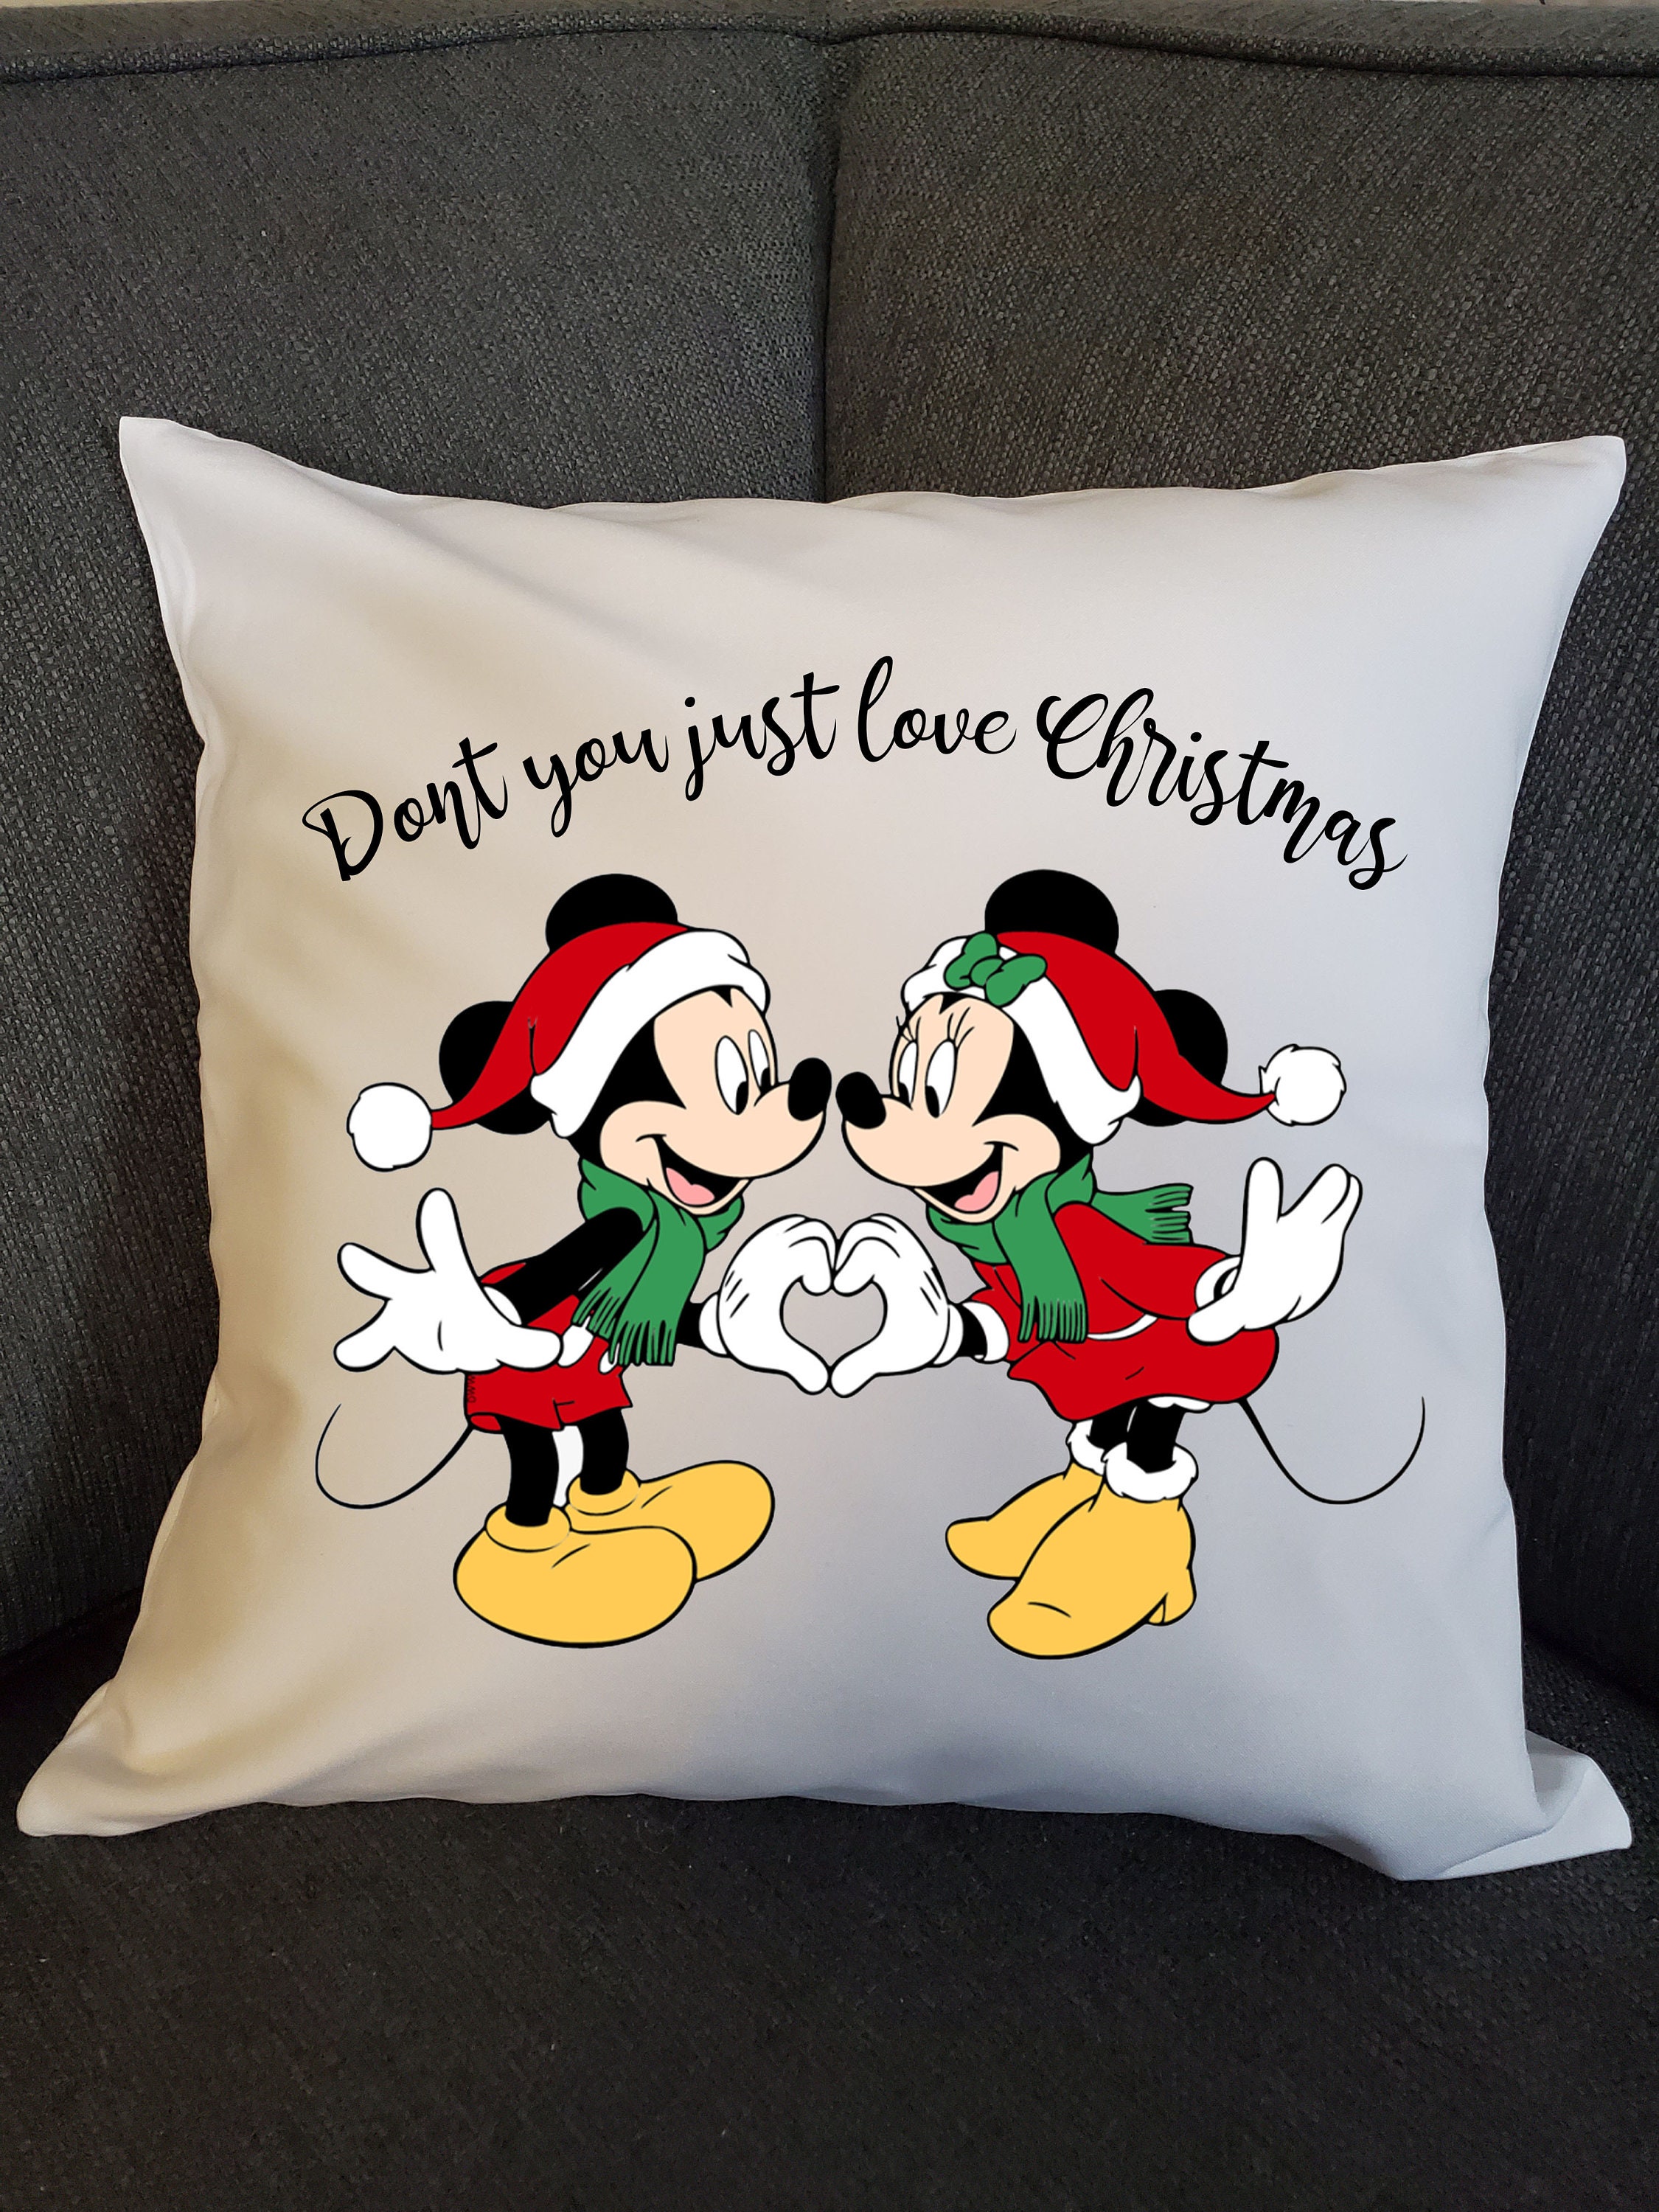 Vintage Disney Minnie Mouse Throw Pillows Yellow Double Sided Graphic 16 x  16